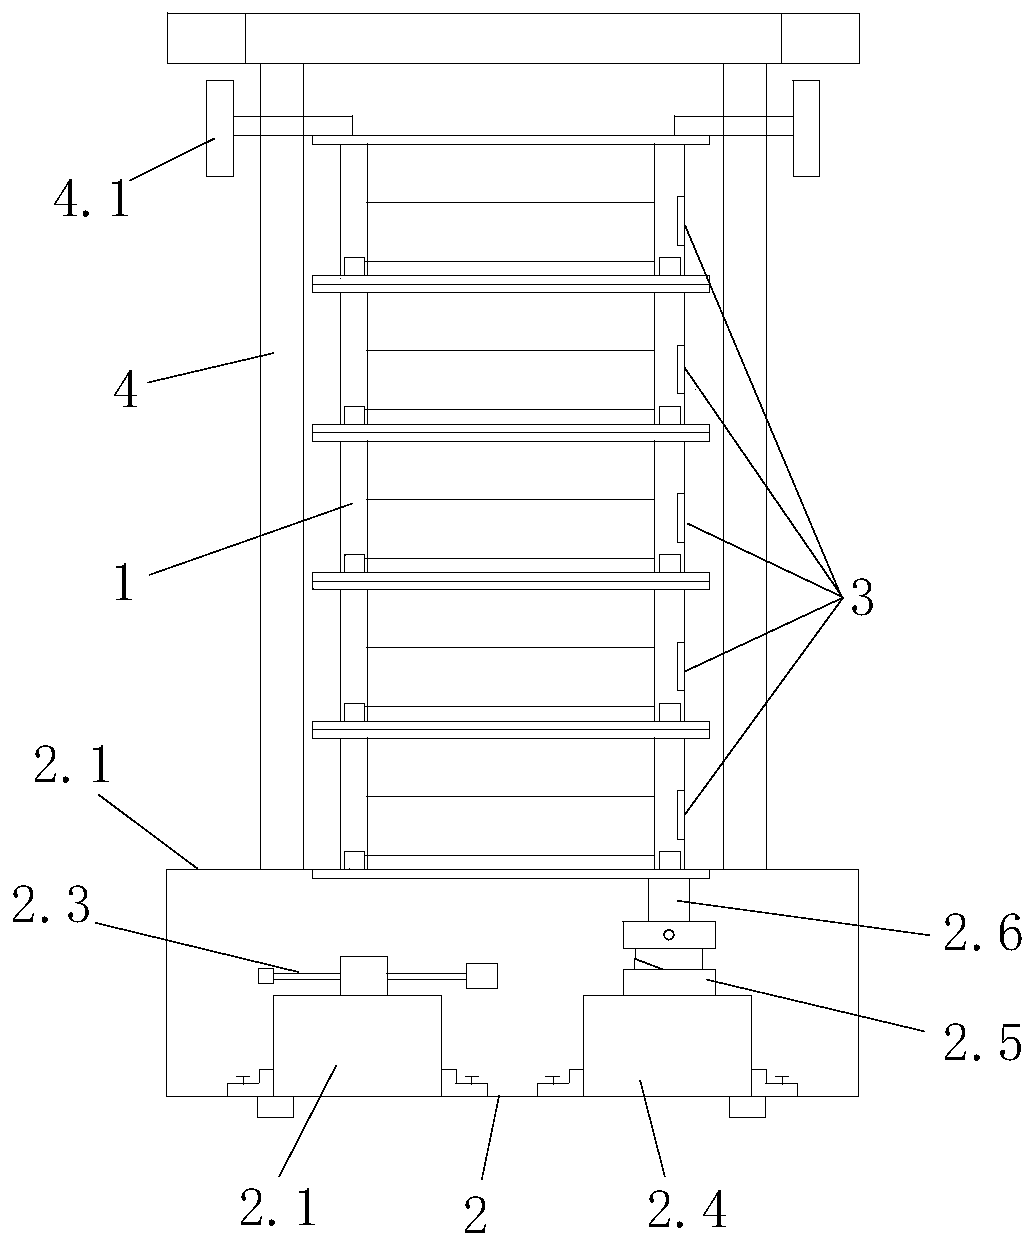 A vibrating sieve machine capable of displaying sieve residue and a method for measuring particle crushing